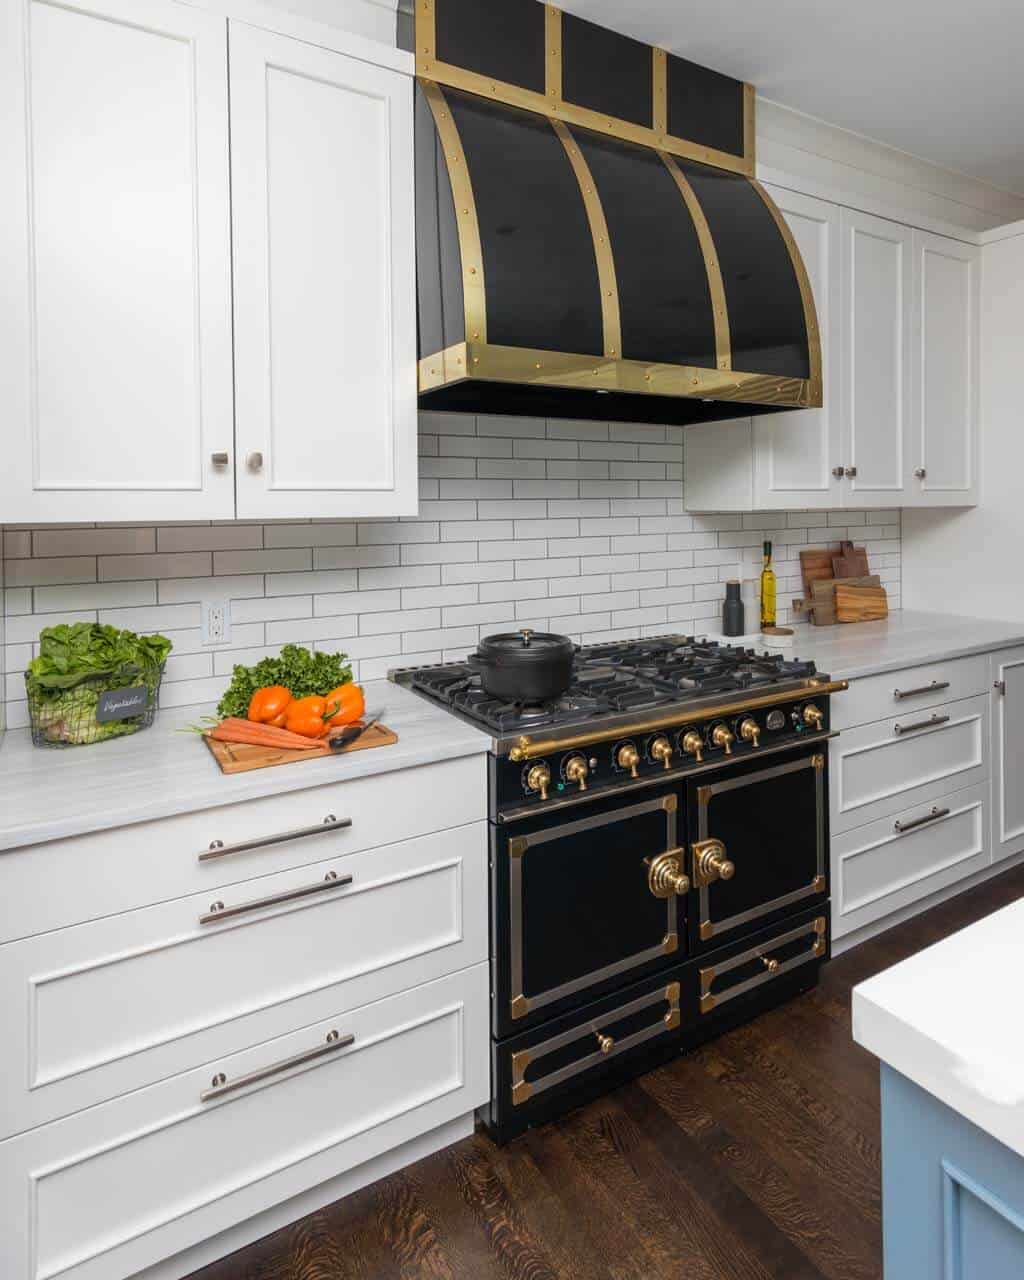 Classic Pleasantville NY kitchen features Bilotta custom cabinets, chrome and brass hardware and black and brass La Cornue range and hood.